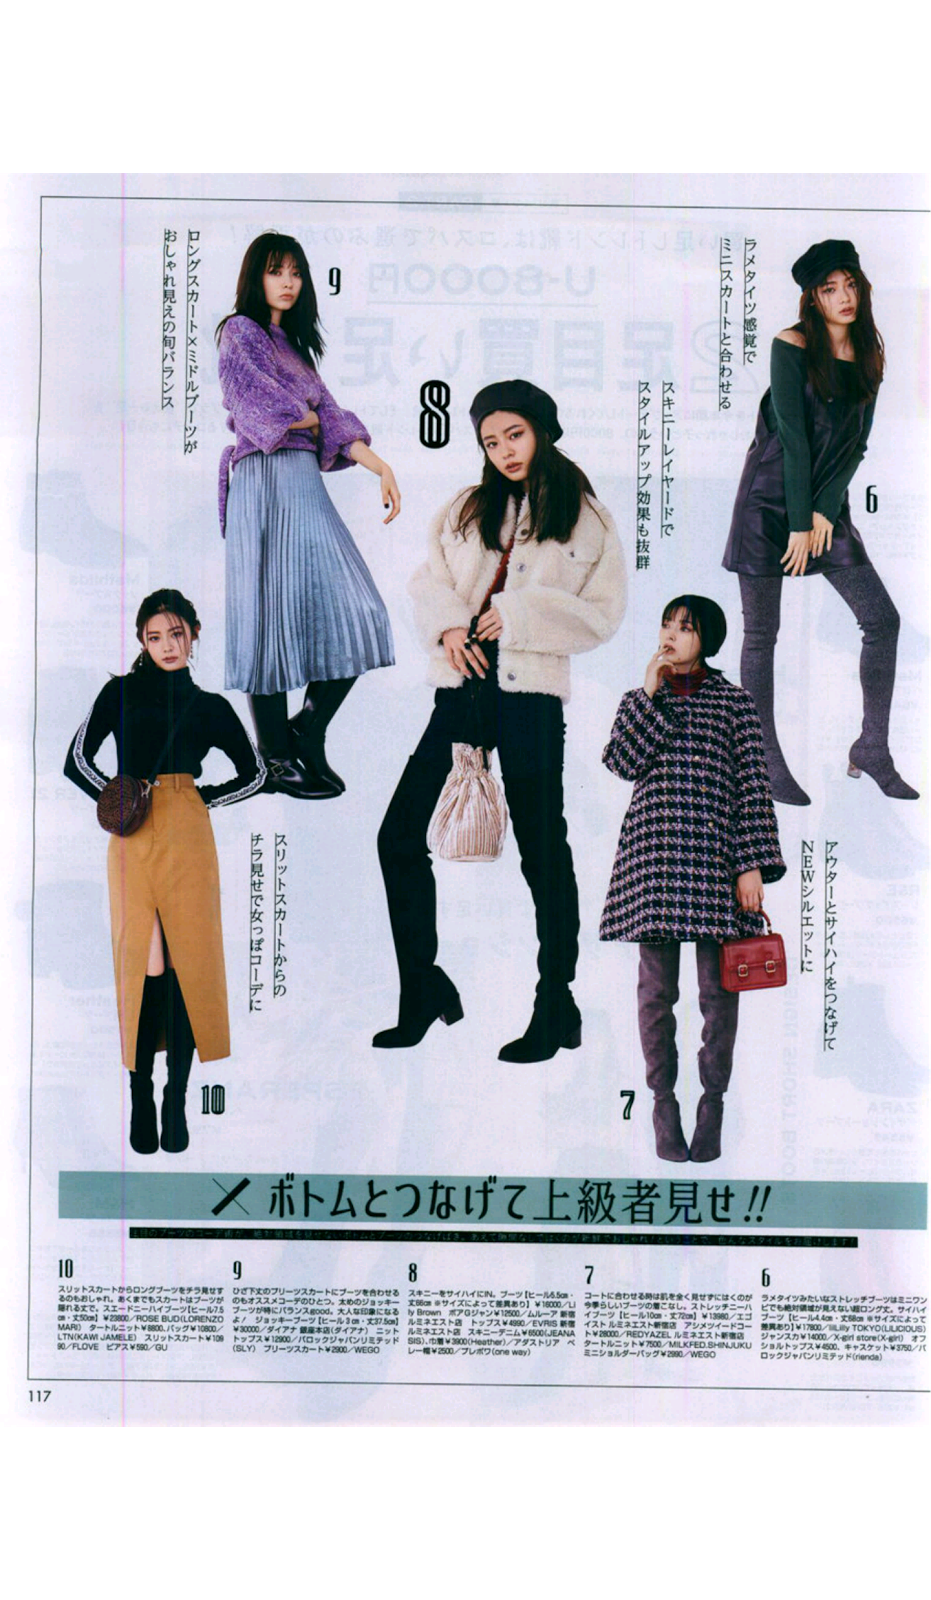 Vivi December 2017 Issue [Japanese Magazine Scans] - Beauty by Rayne